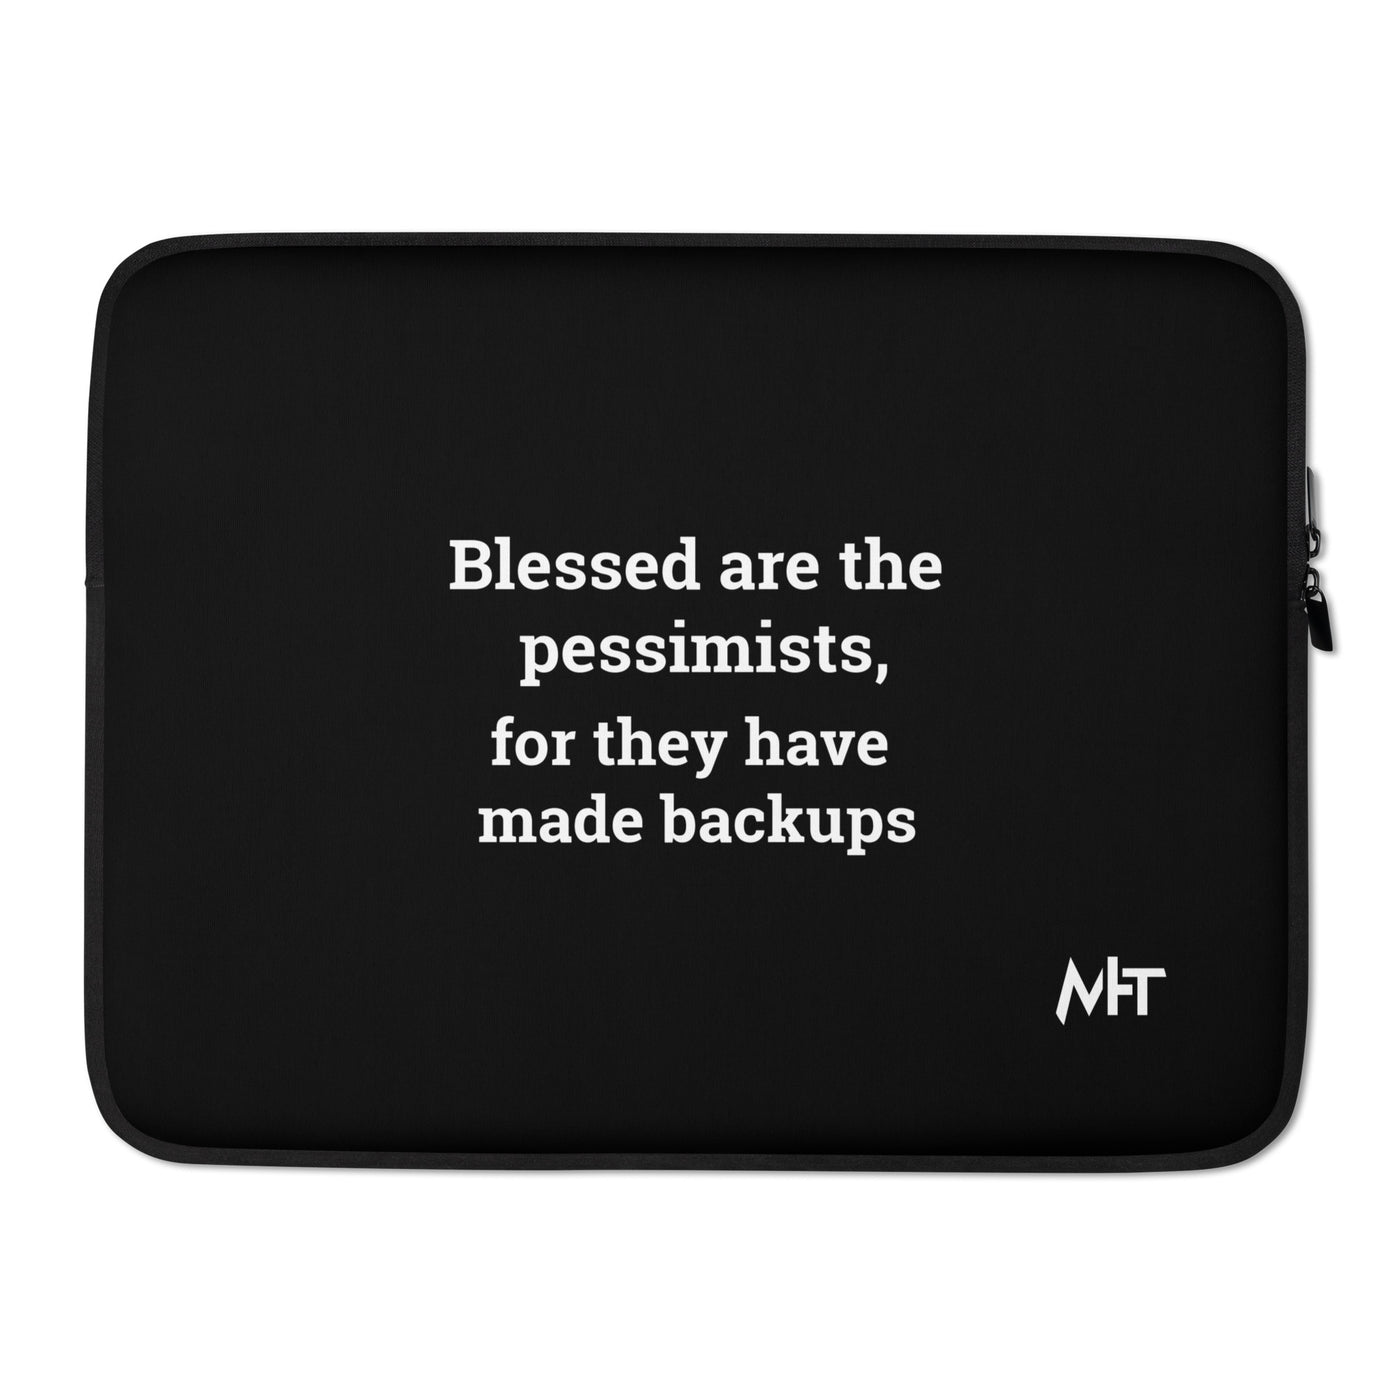 Blessed are the pessimists for they have made backups V1 - Laptop Sleeve